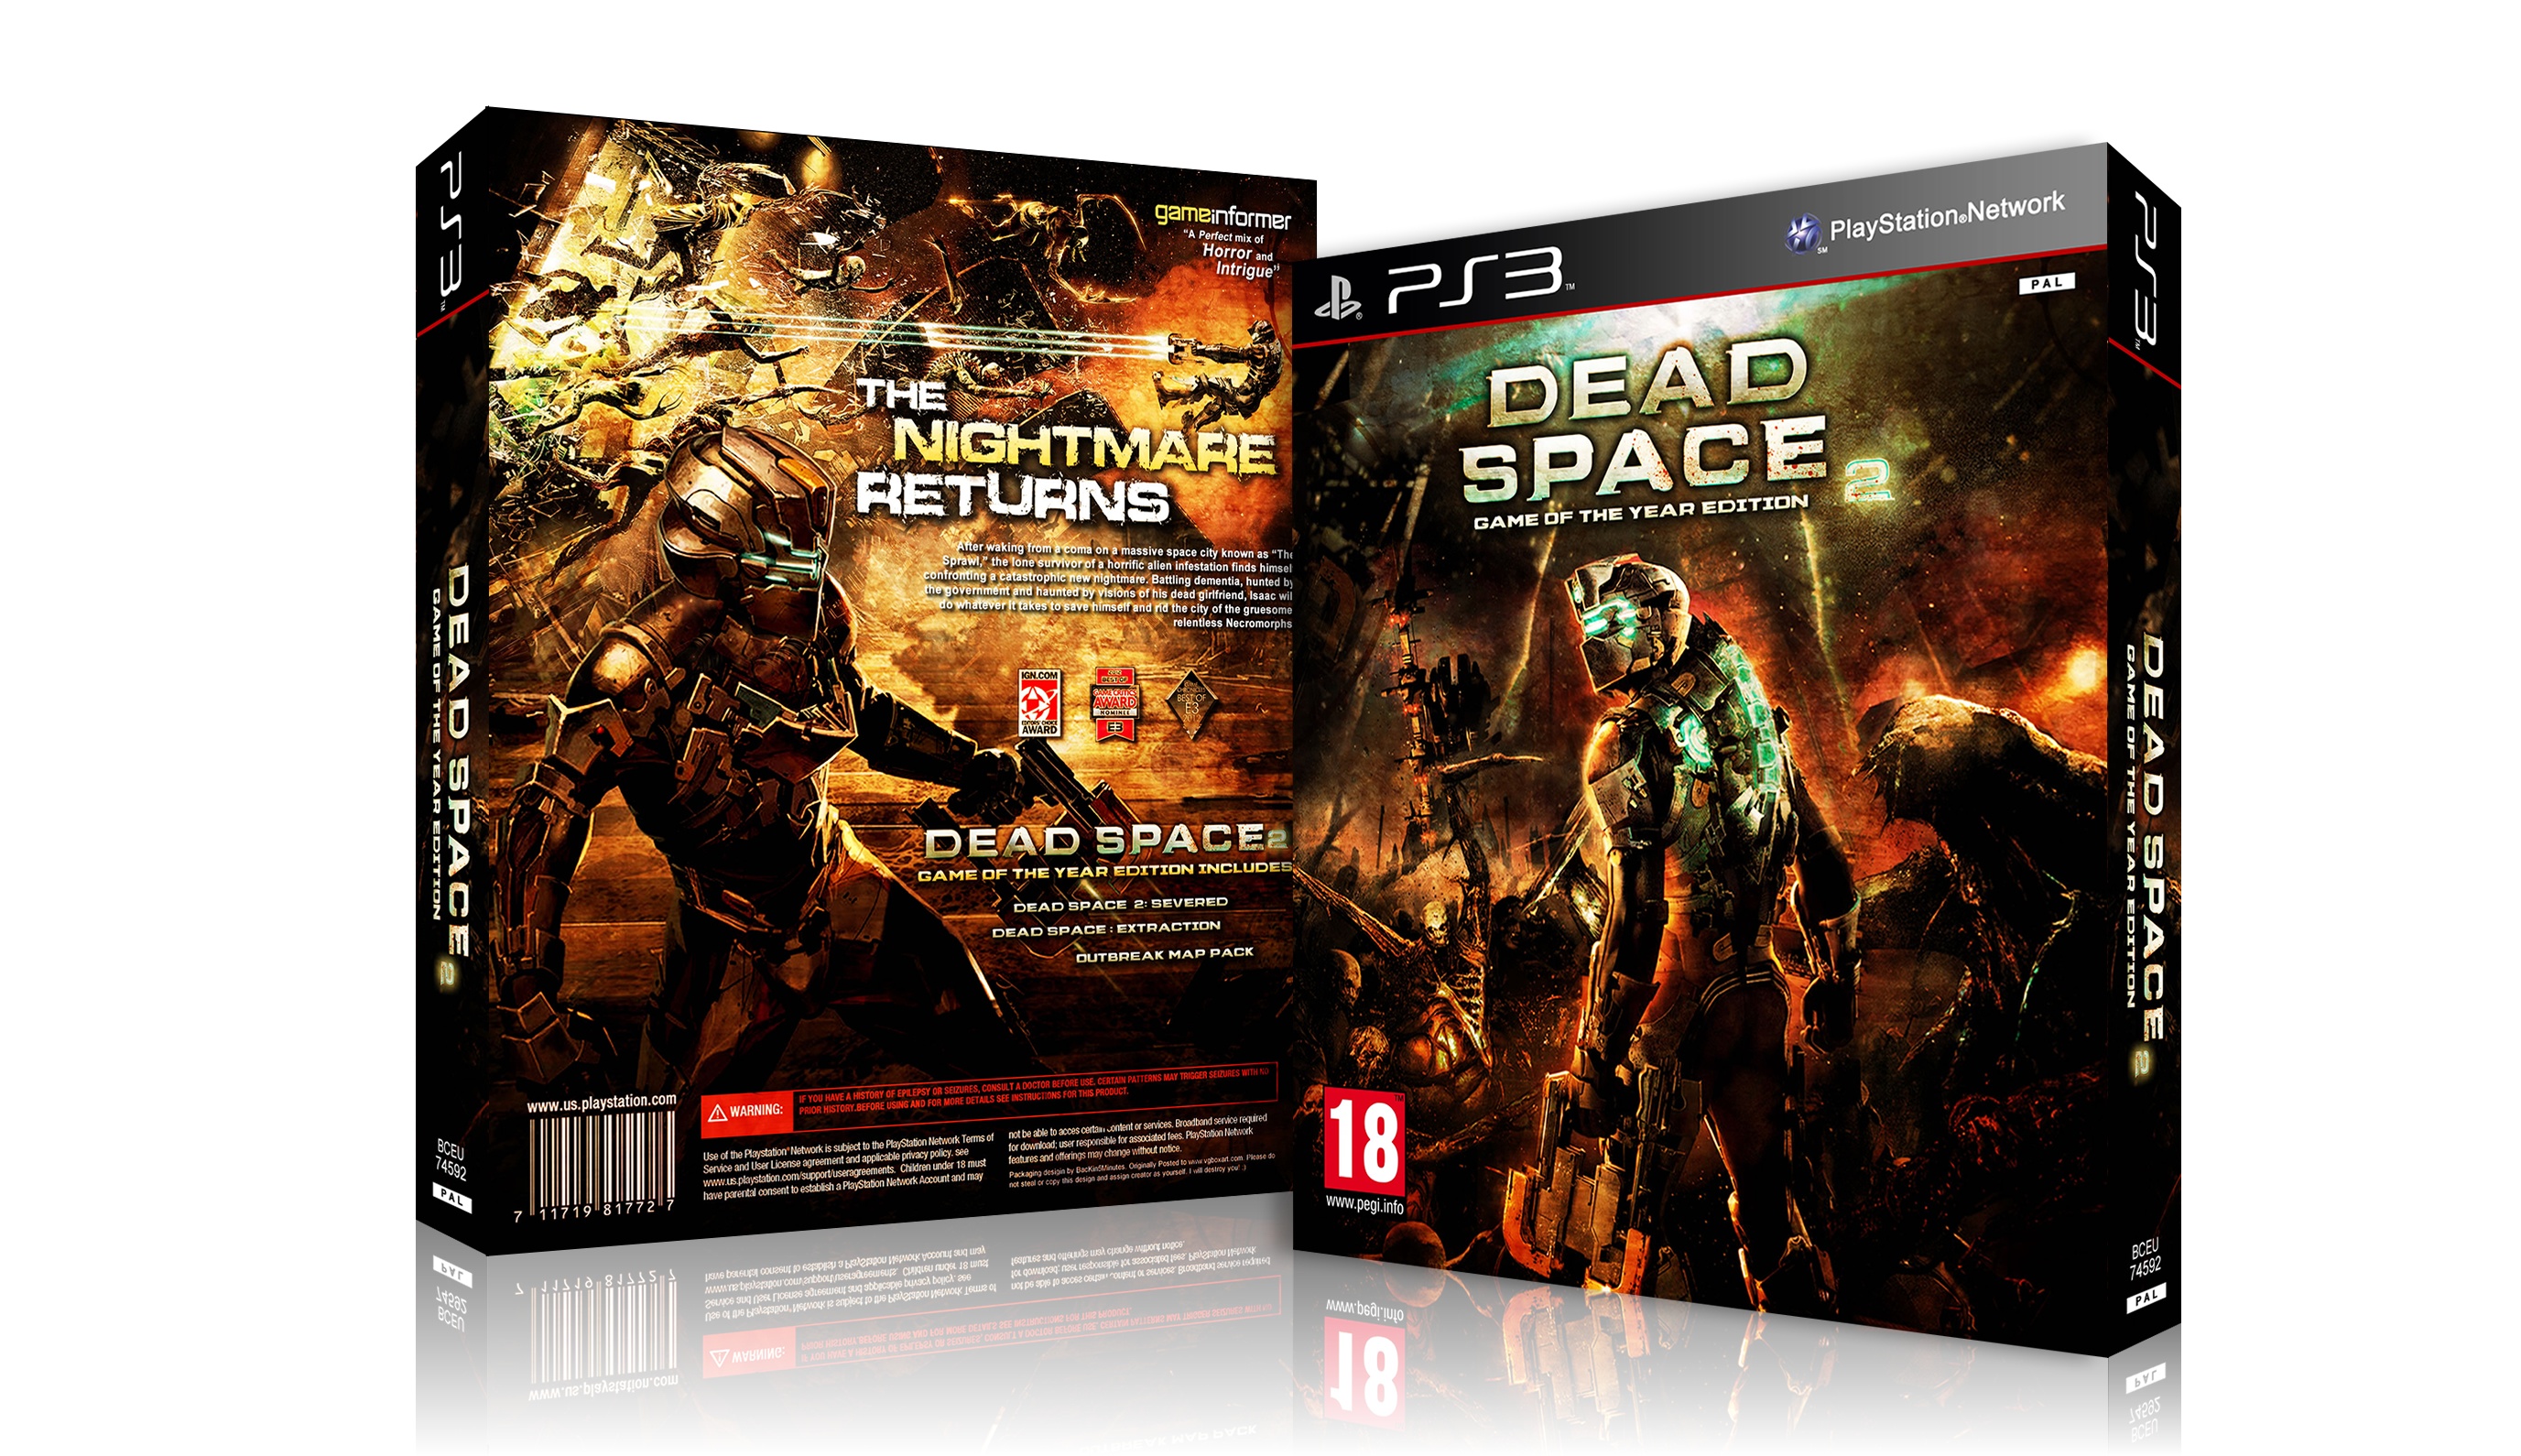 Dead Space 2: Game of the Year Edition box cover